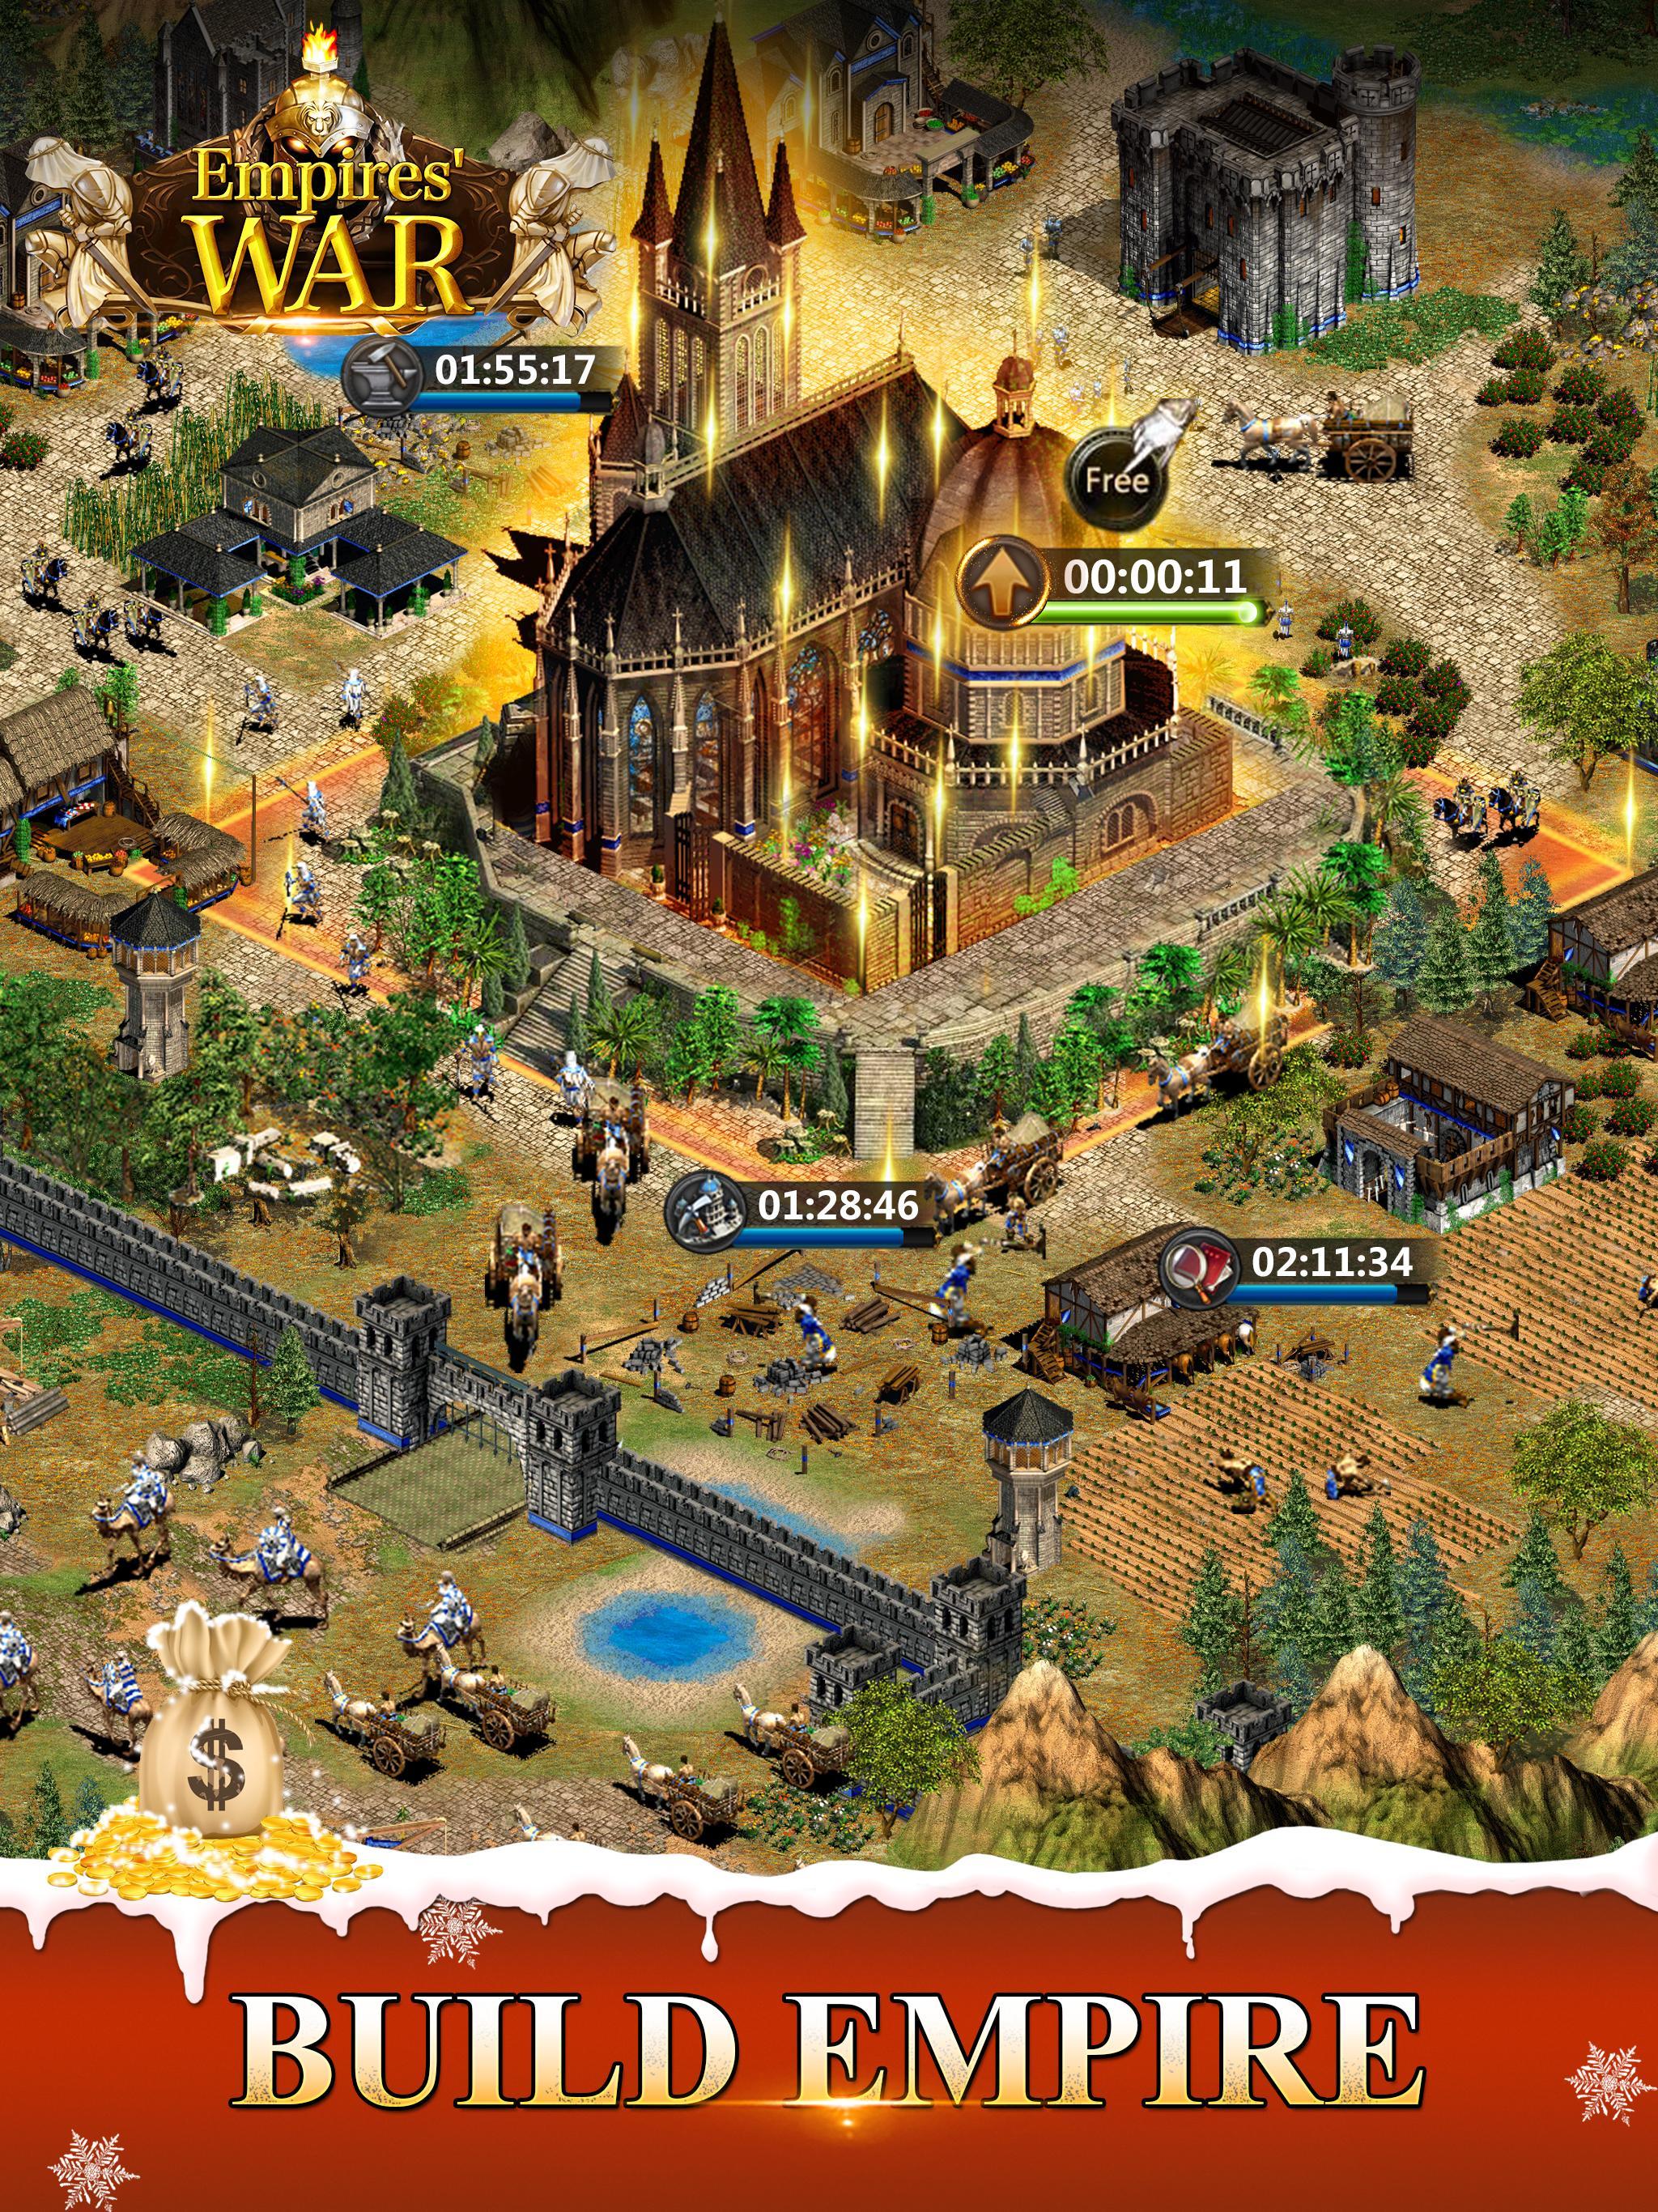 Age of empires 4 download for pc